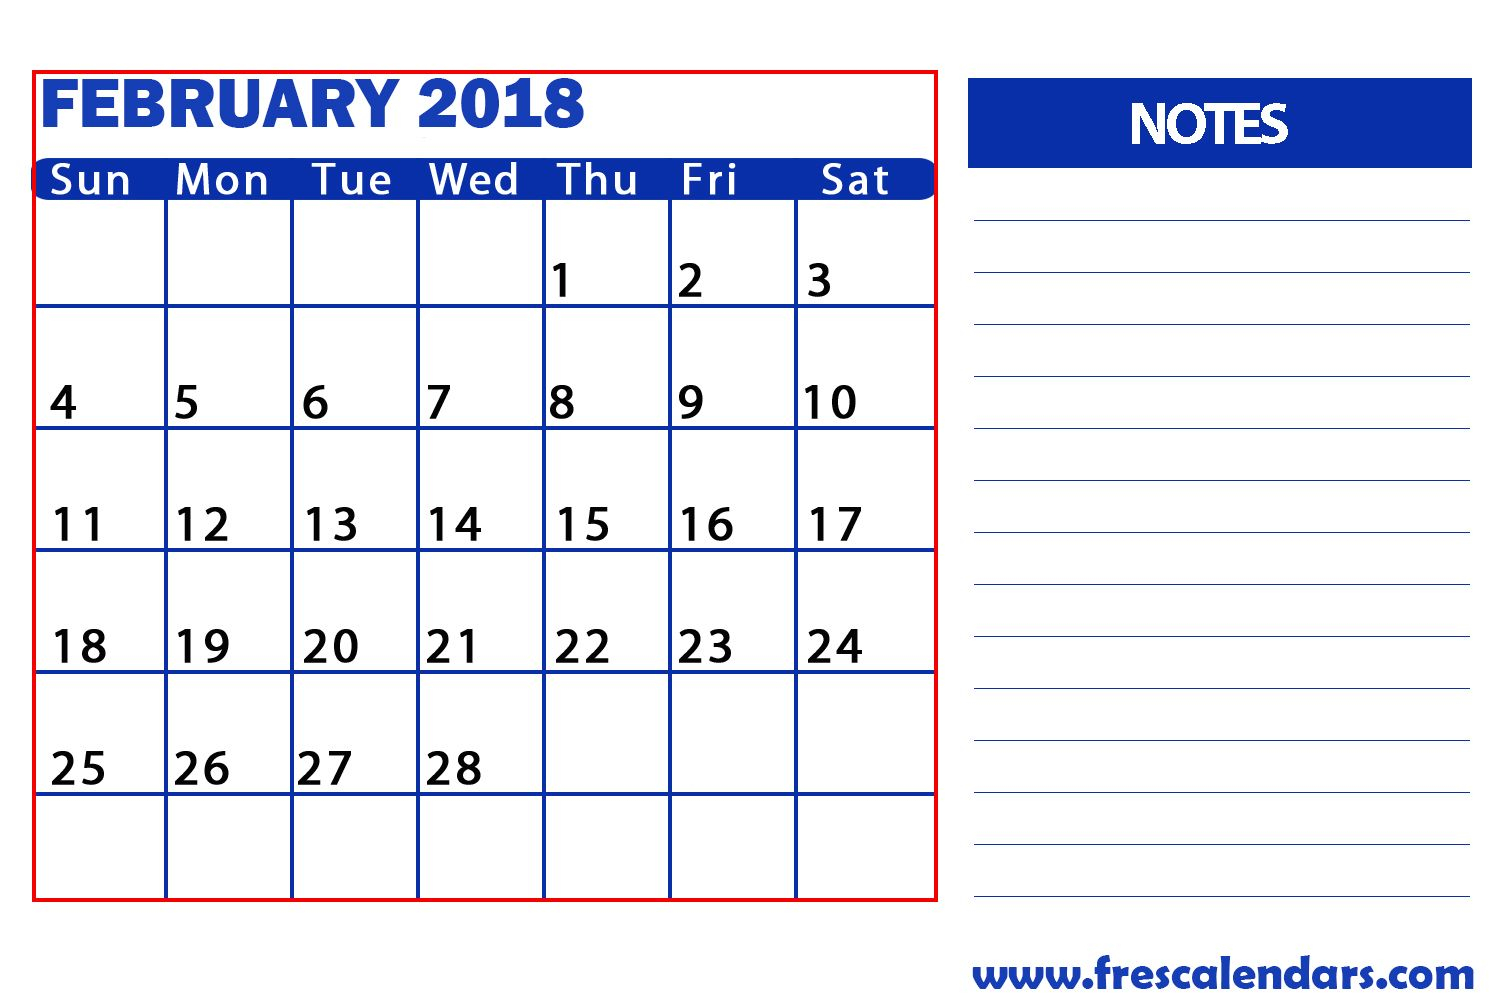 February Calendar With Notes Space | Free Images At Clker